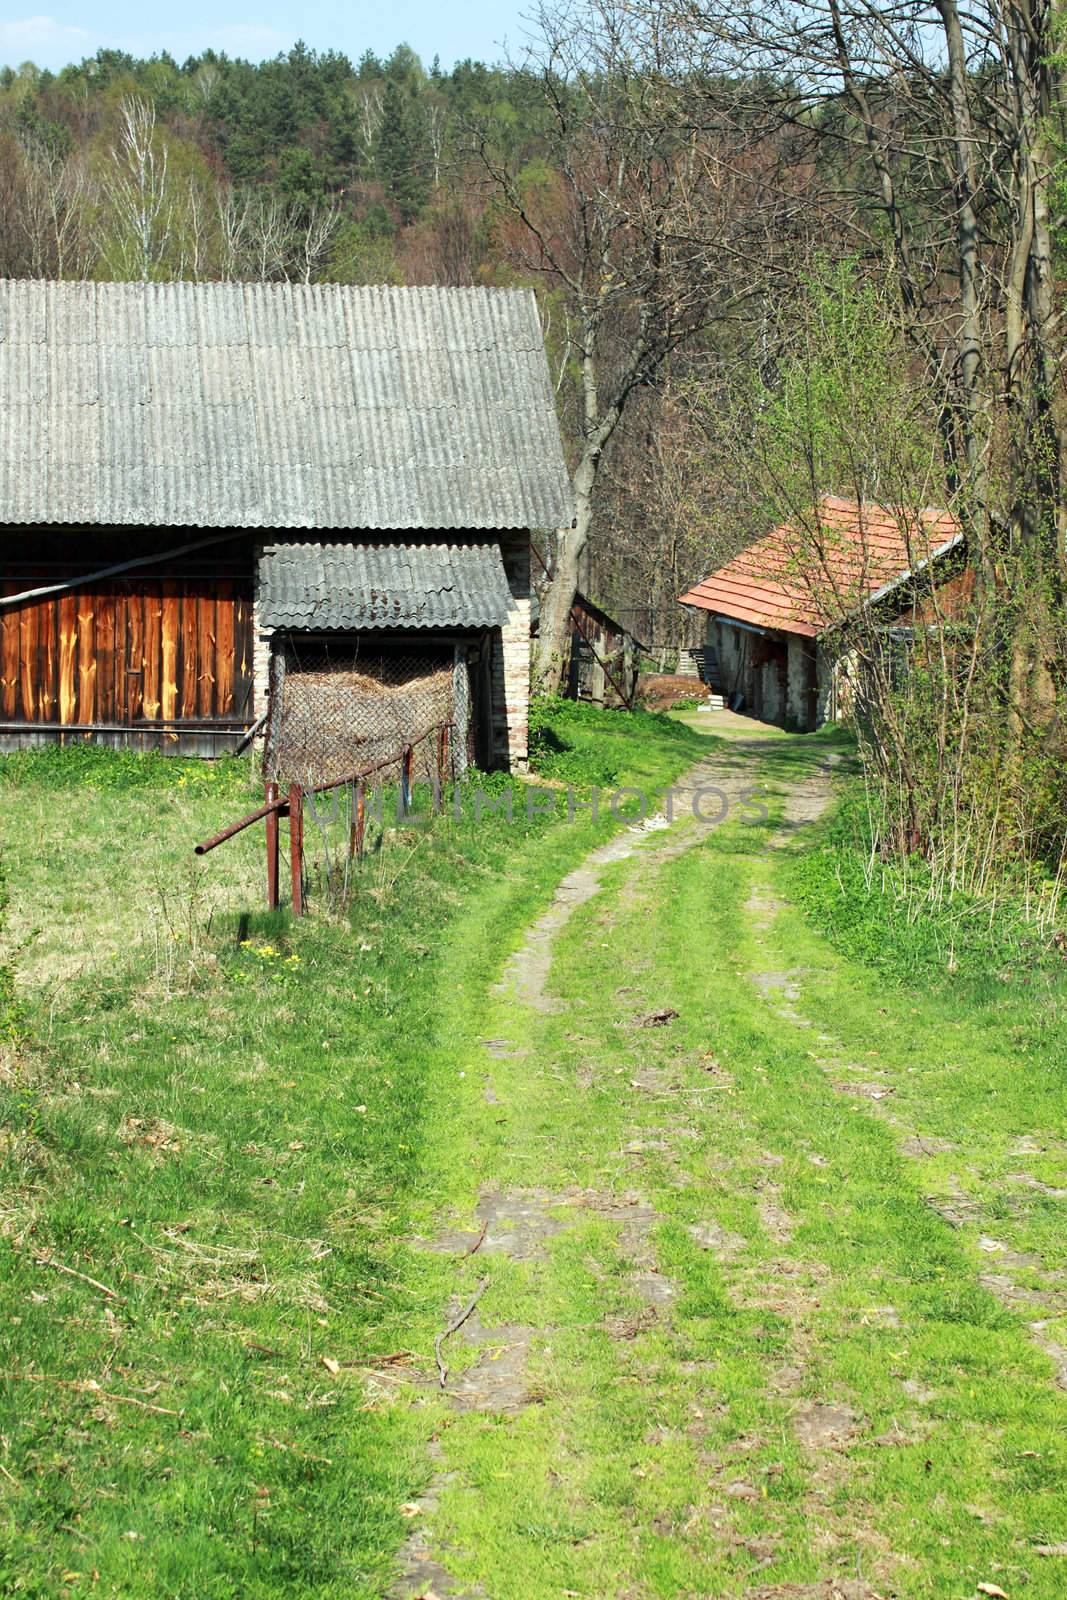 rural landscape with farm buildings and road